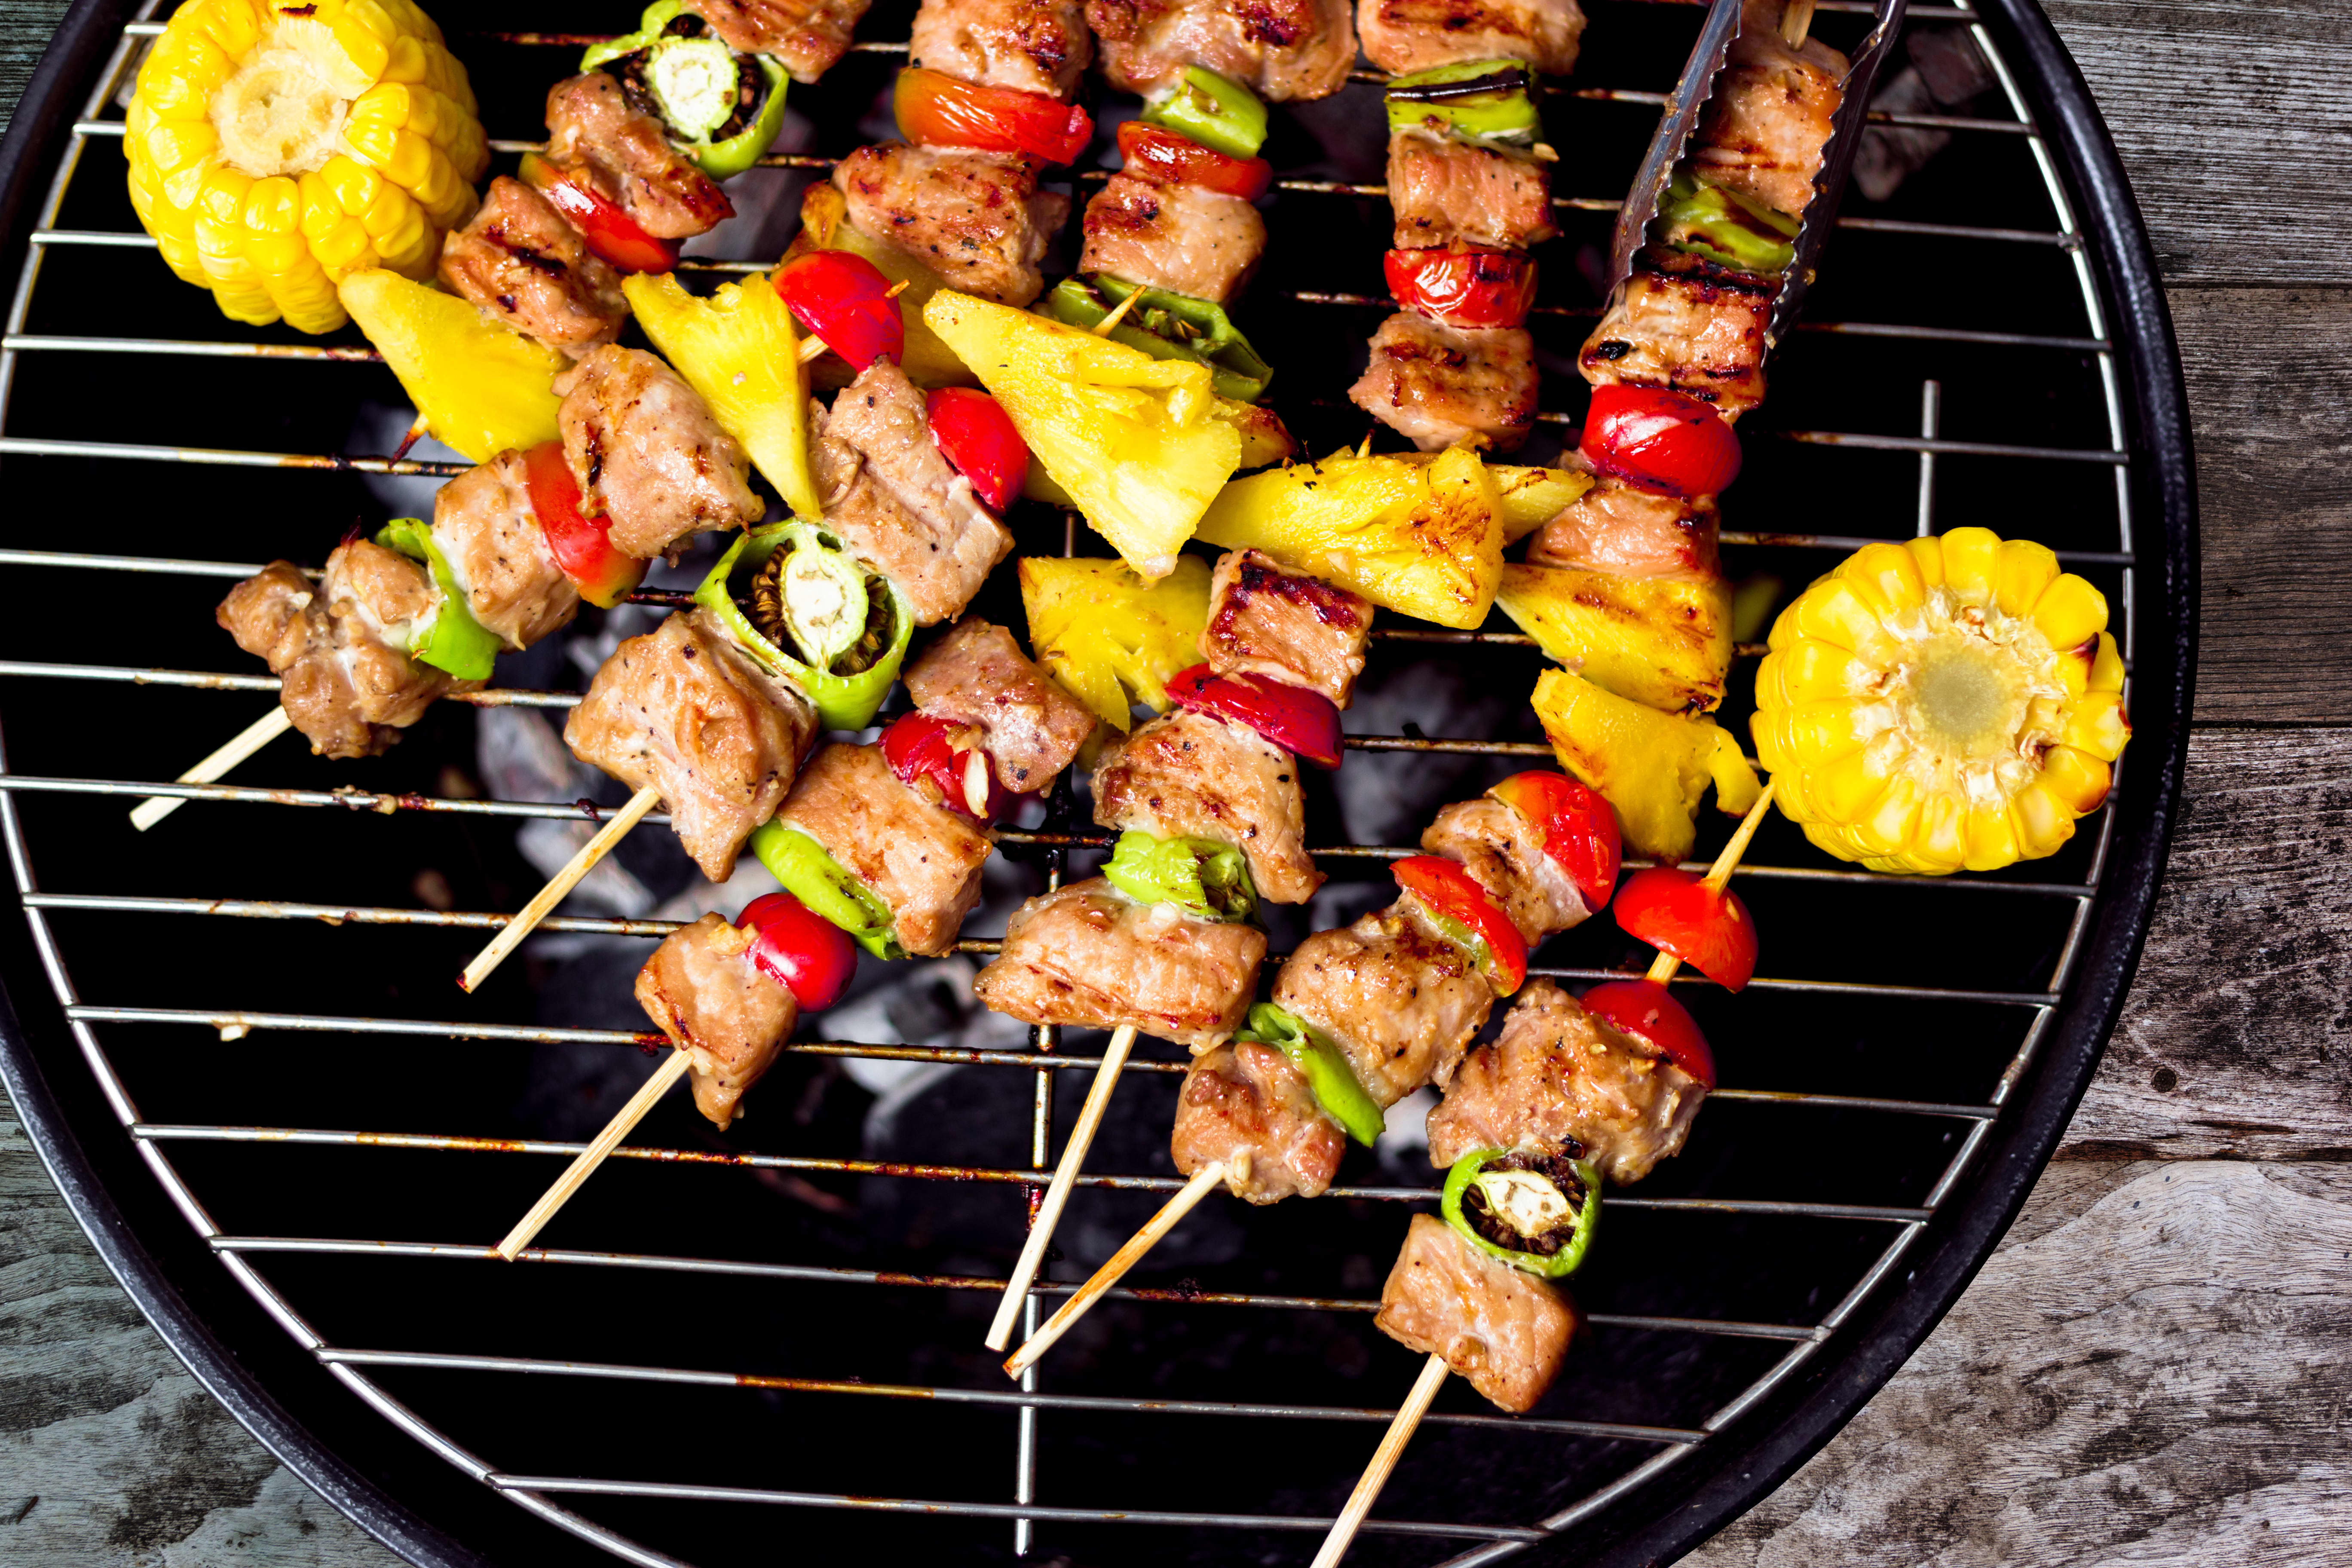 Grill Like a Pro: 5 Tips to Serve Up Ultra-Juicy Meat This Summer